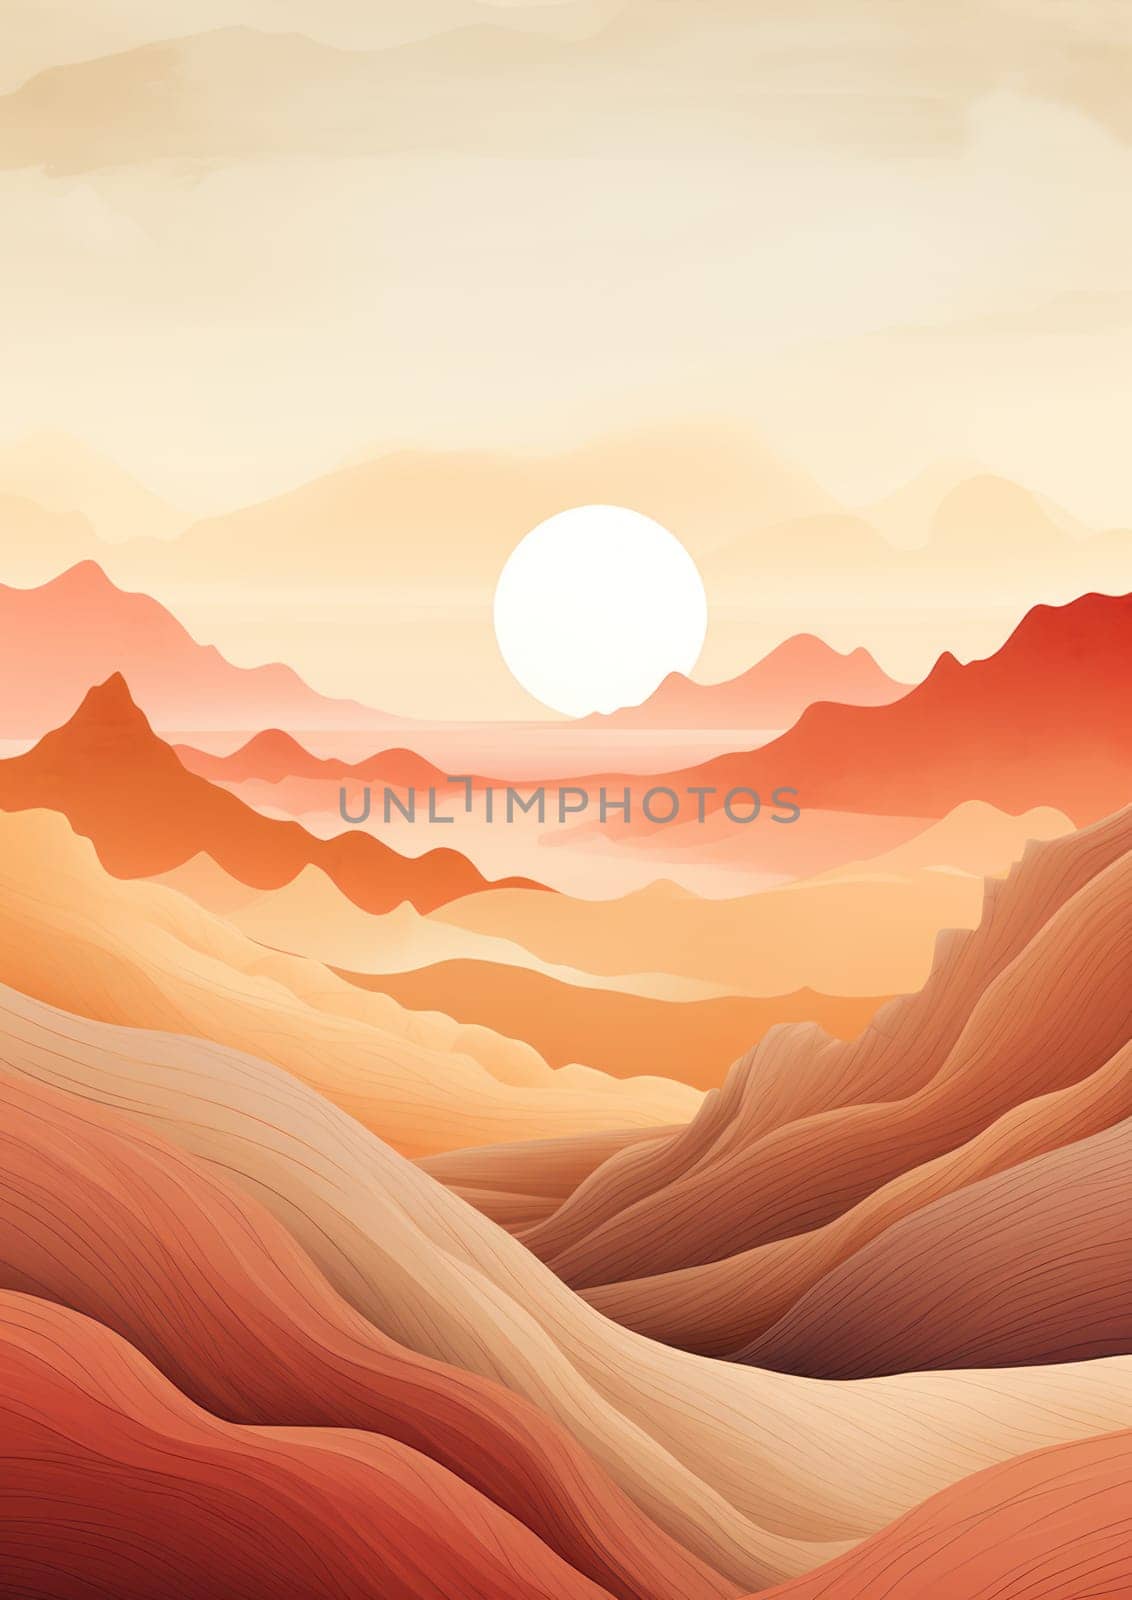 Silhouette of Majestic Mountains: A Tranquil Sunrise Over the Colorful Landscape